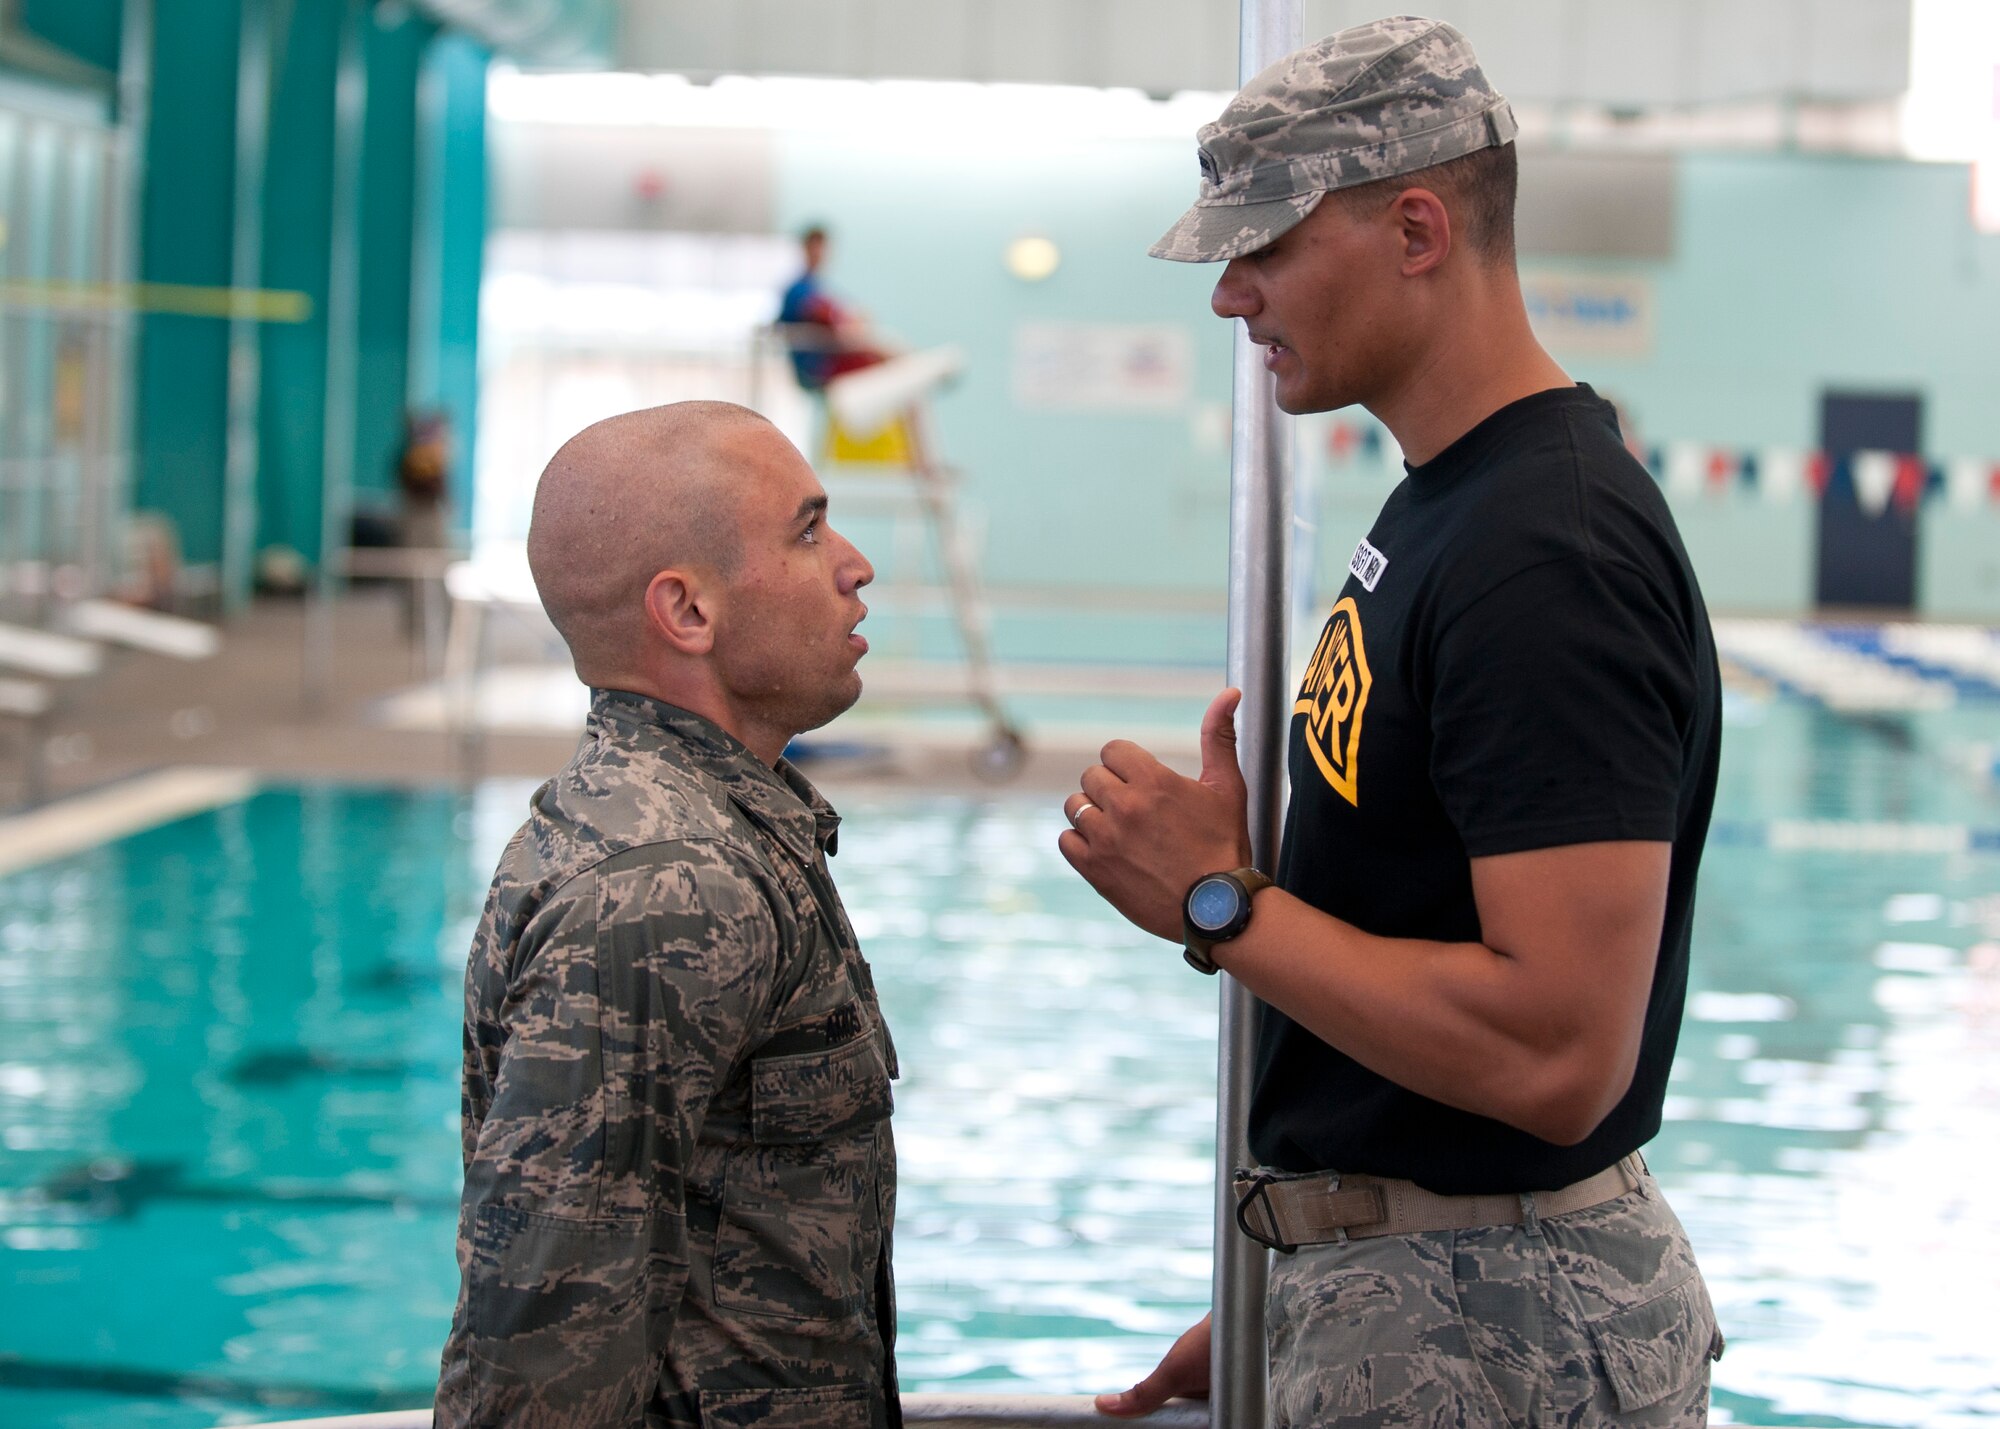 Staff Sgt. Marco Nelson (right), a Ranger Assessment Course instructor, tells a student what he did wrong during the water survival portion of the course at the Municipal Pool, Las Vegas, Oct. 2, 2014. Many students who do not make it through the course underestimate its intensity or fail to do proper research on the course. Every RAC instructor is a U.S. Army Ranger School graduate. (U.S. Air Force photo by Airman 1st Class Thomas Spangler)